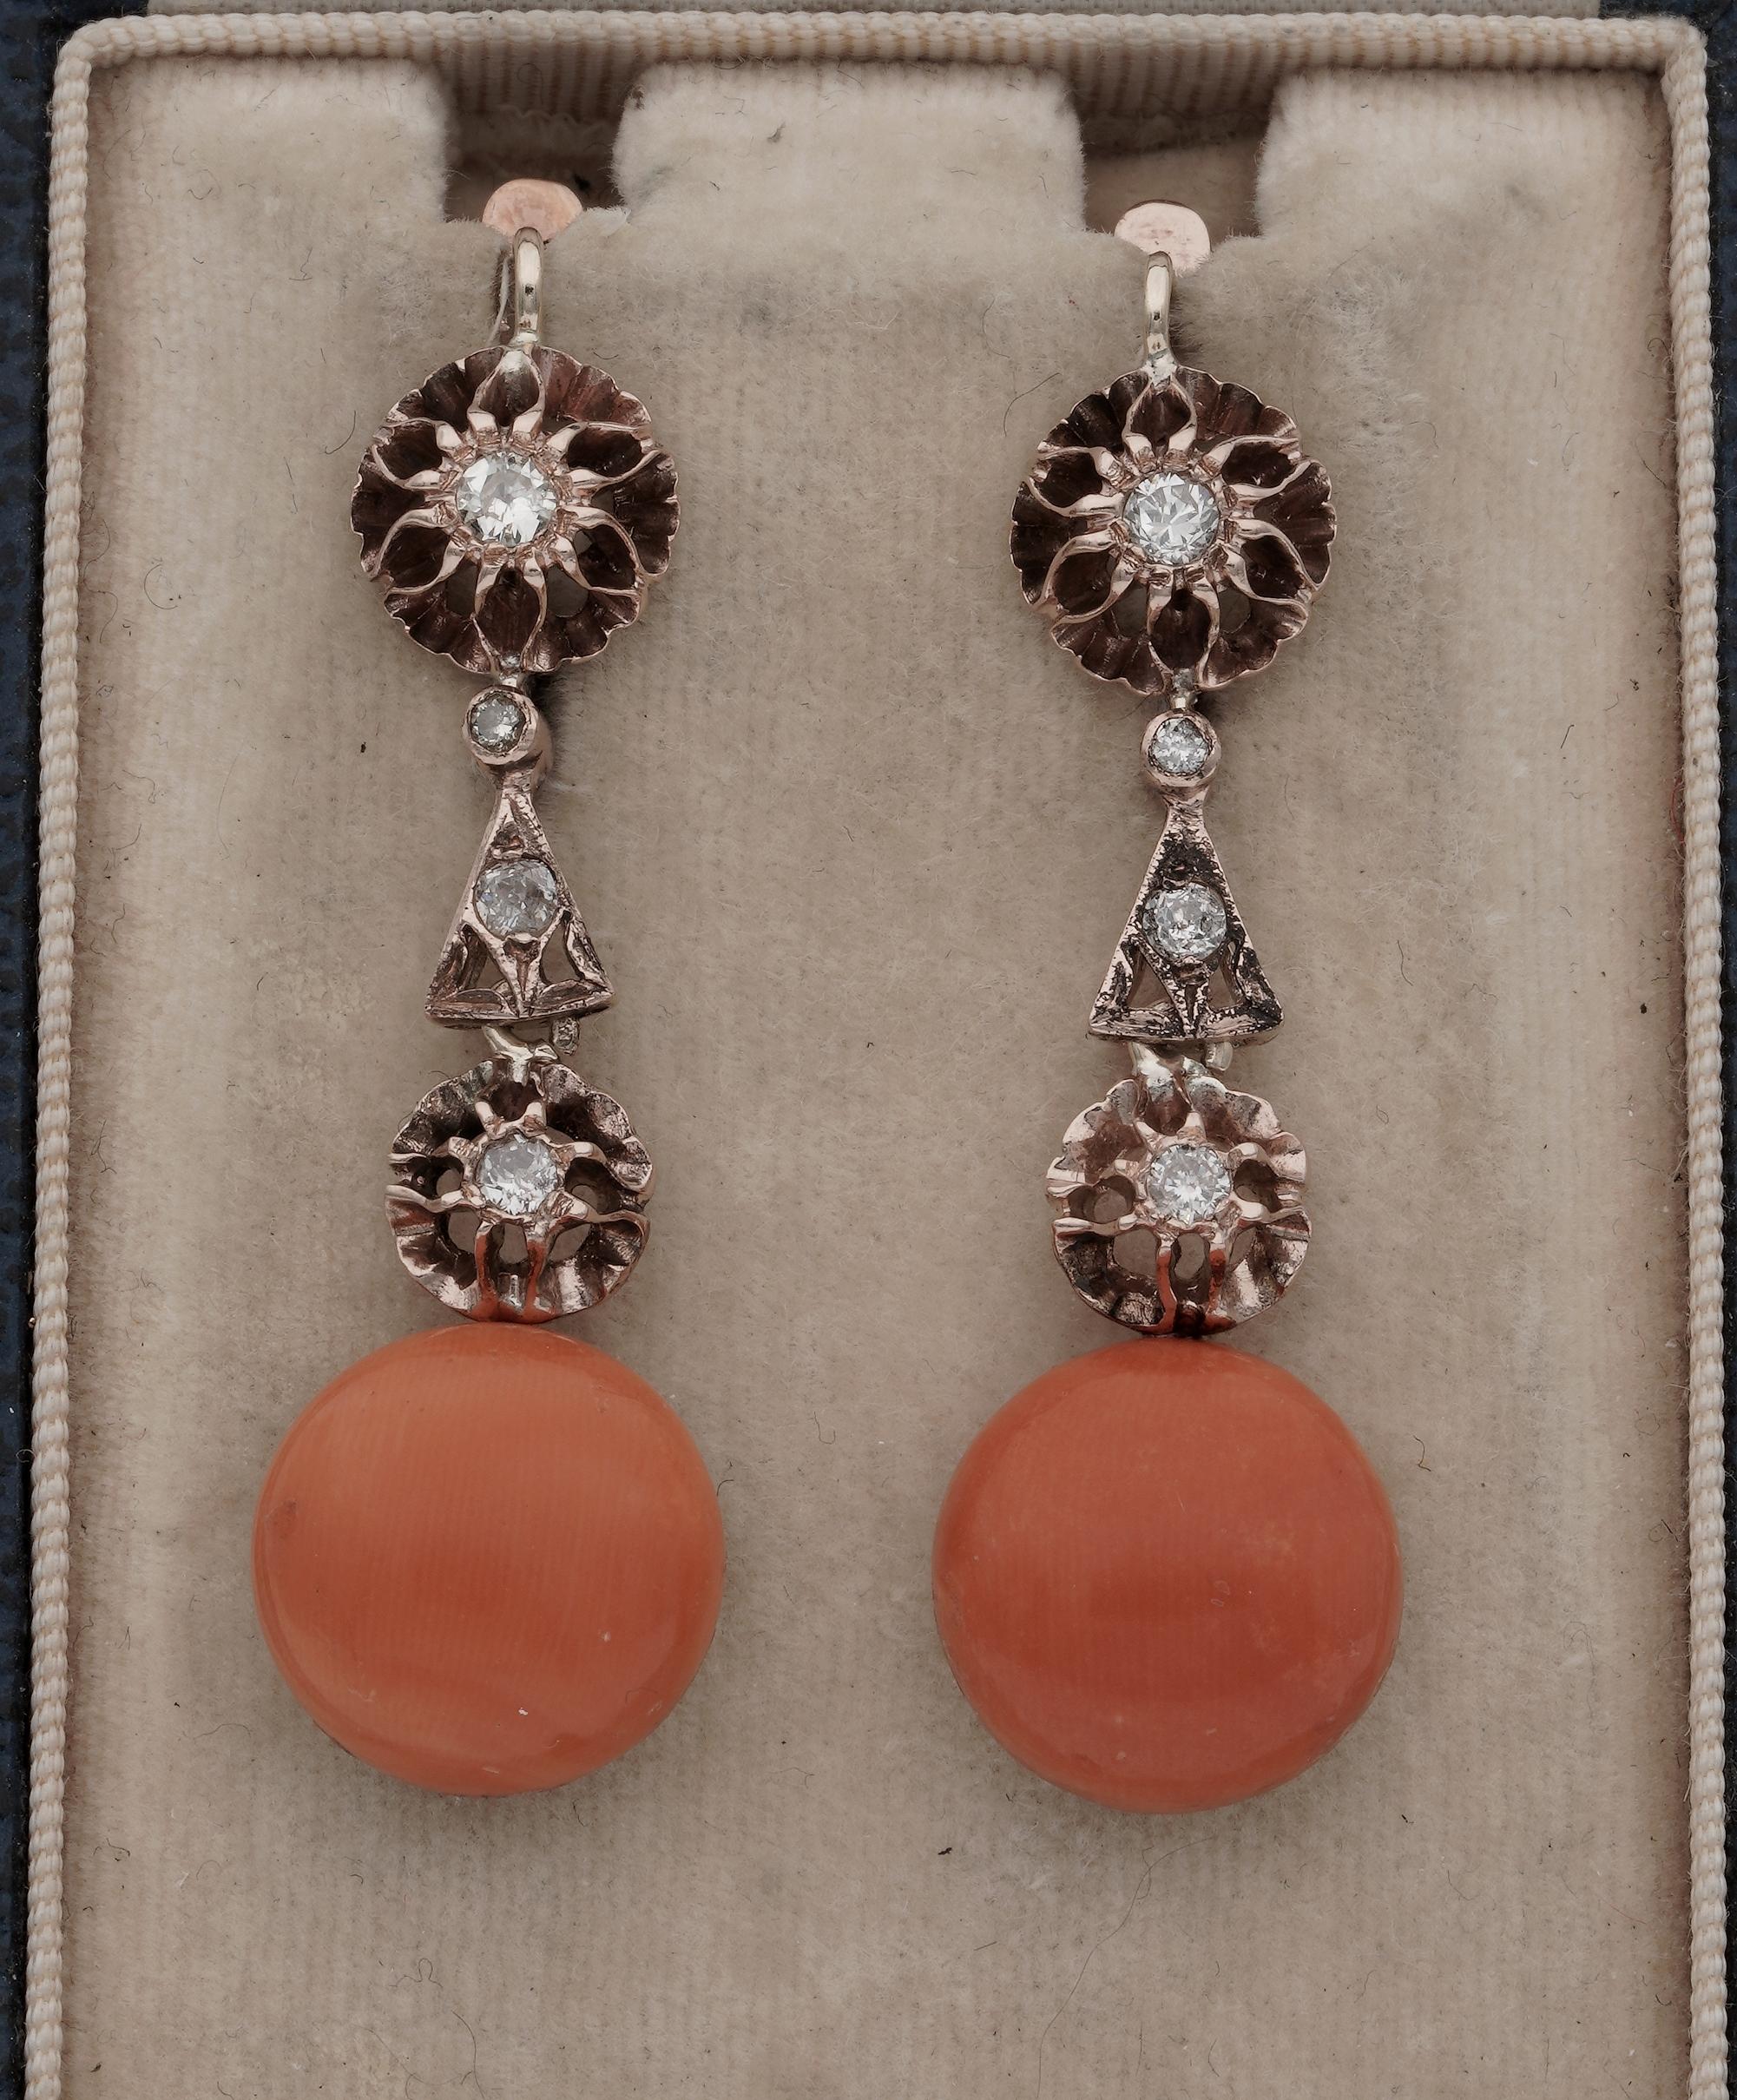 Past Treasures
A beautiful pair of antique Coral & Diamond earrings, 1890/1900 ca
marvellous in design, hand crafted of solid 12 KT gold 
Set with a fantastic selection of Natural untreated Salmon Red Coral blemish free; 14 mm. in diameter
Diamonds